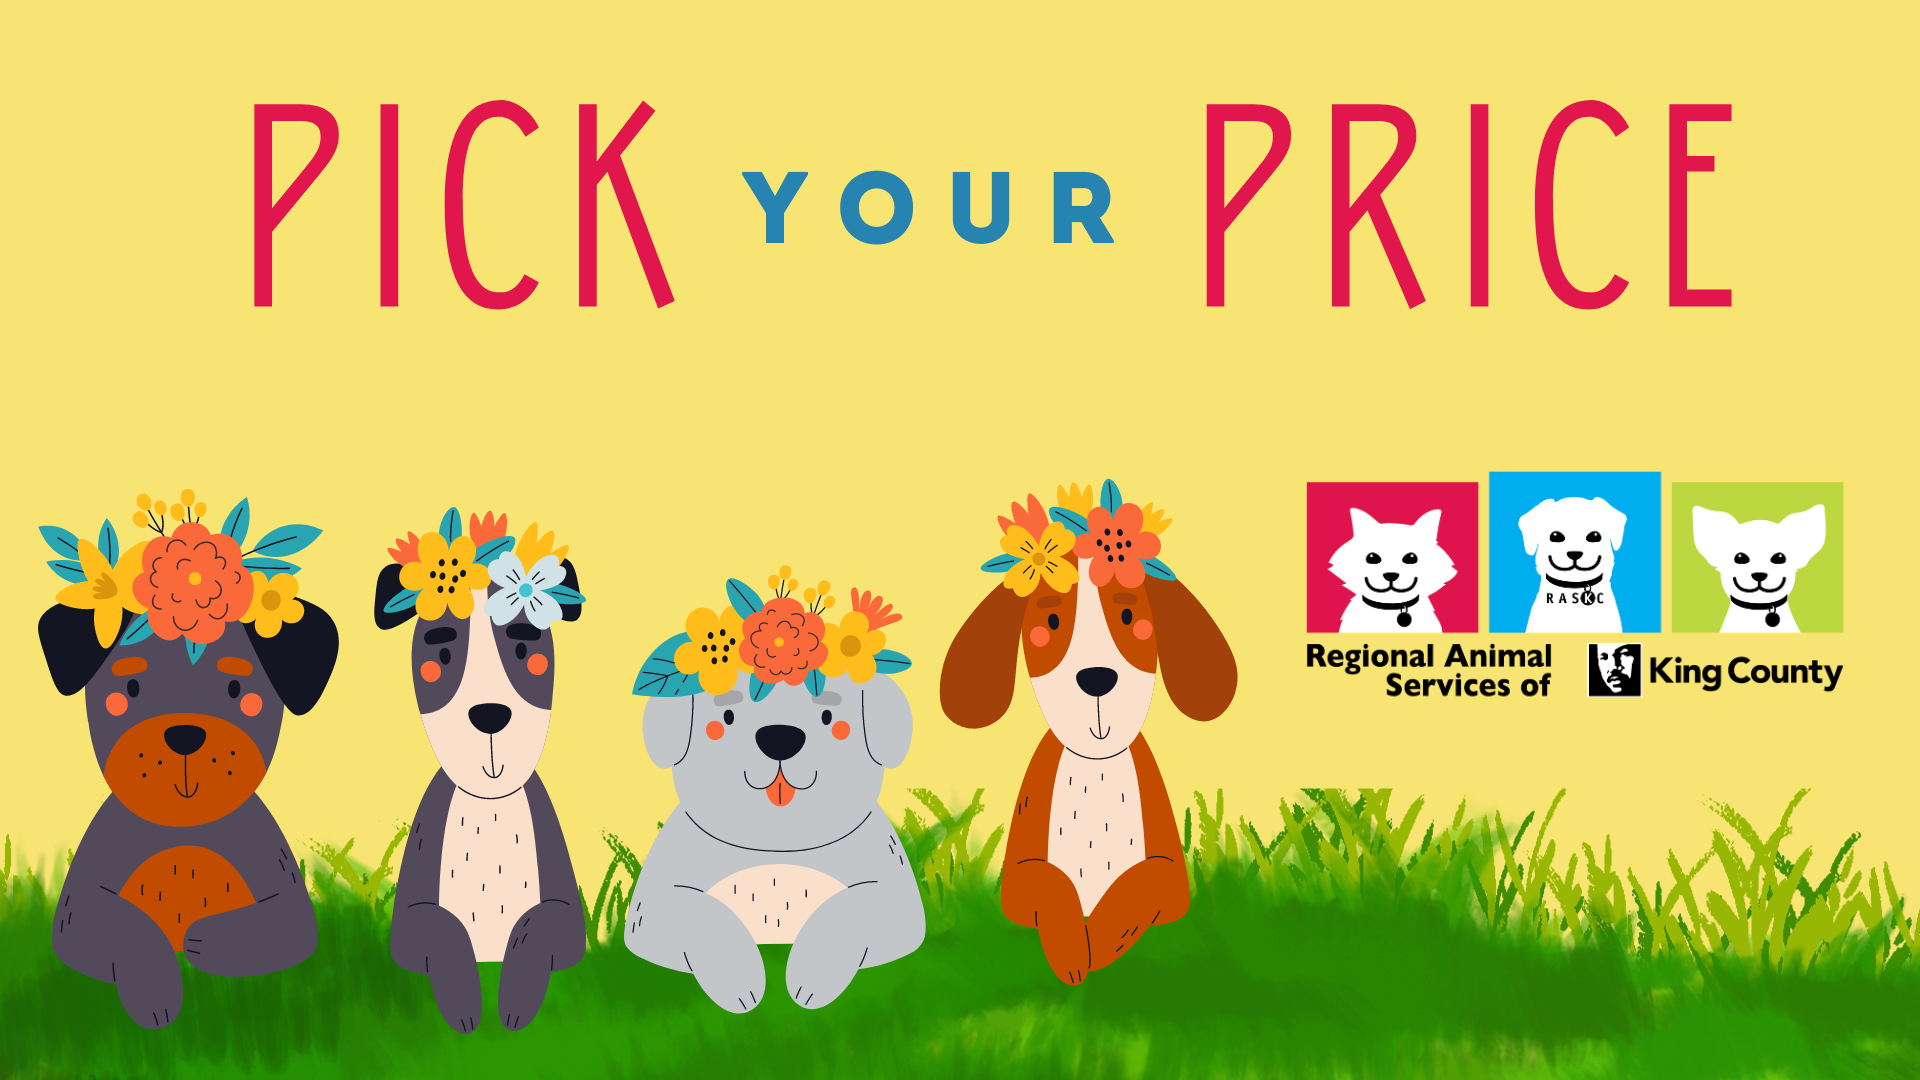 Banner with four cartoon dogs wearing flowers and text "Pick Your Price" with a RASKC logo